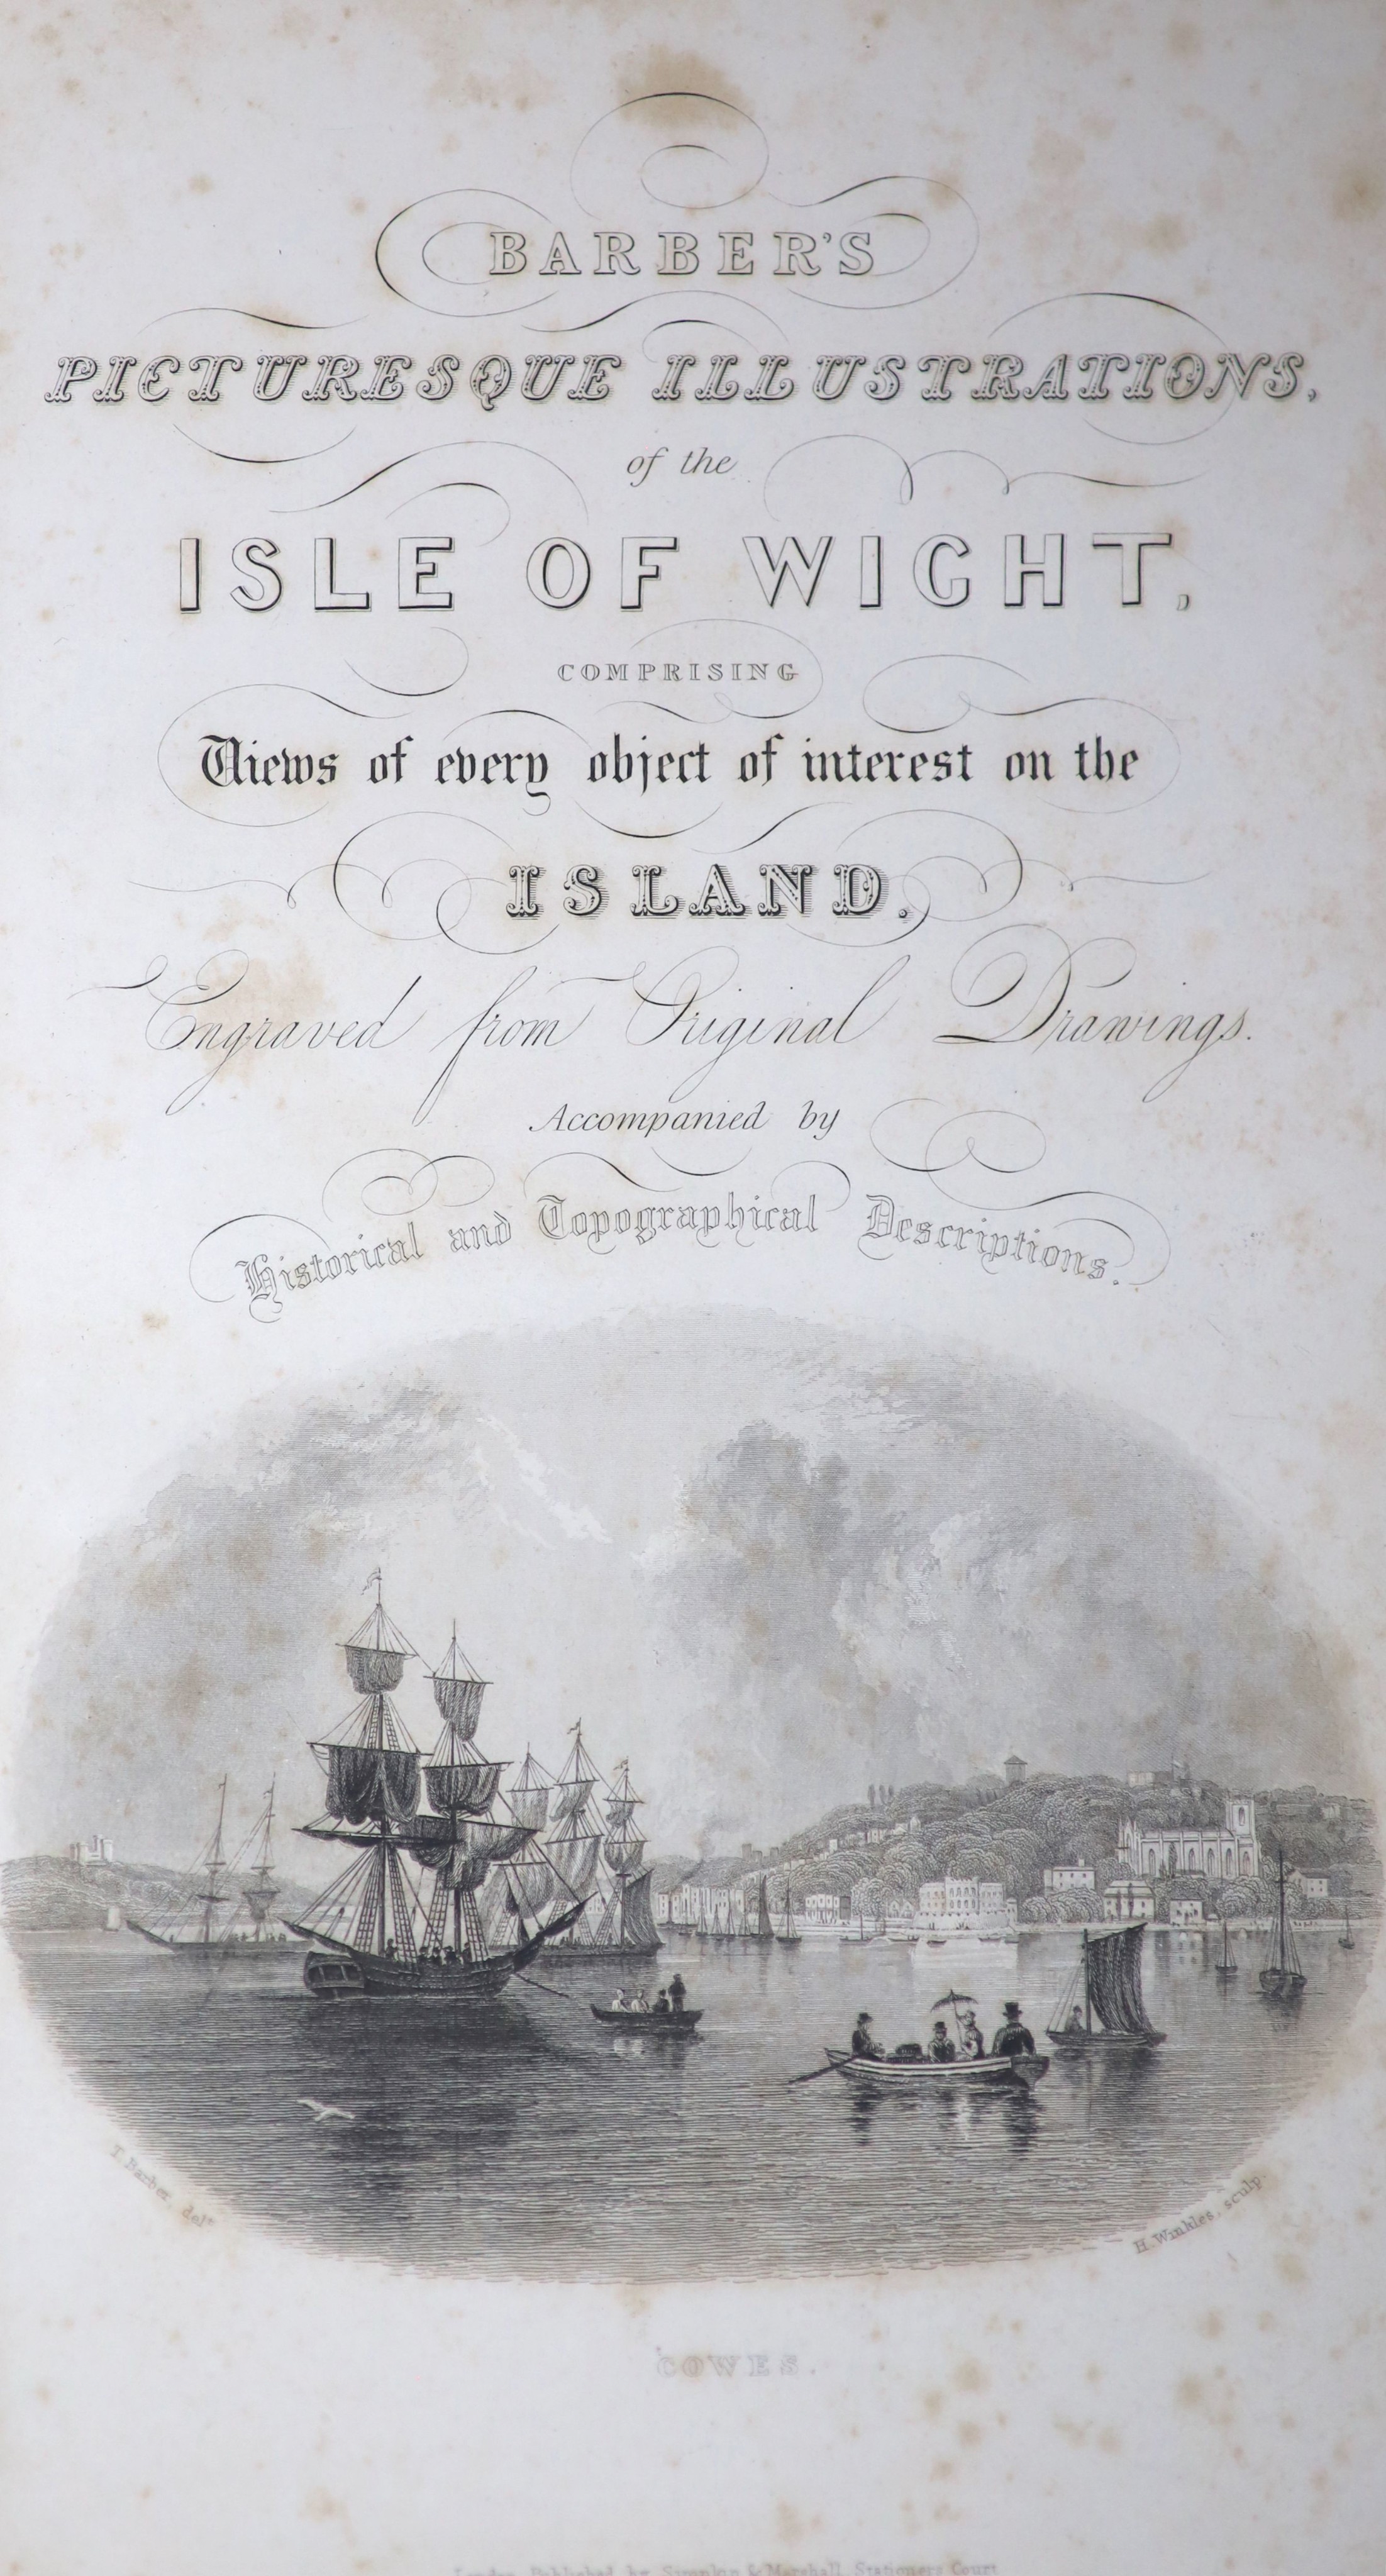 Barber, Thomas - Picturesque Illustrations of the Isle of Wight, original cloth with gilt vignette, engraved title (foxed), folding map and 40 plates, Simpkin and Marshall, London, [1834]